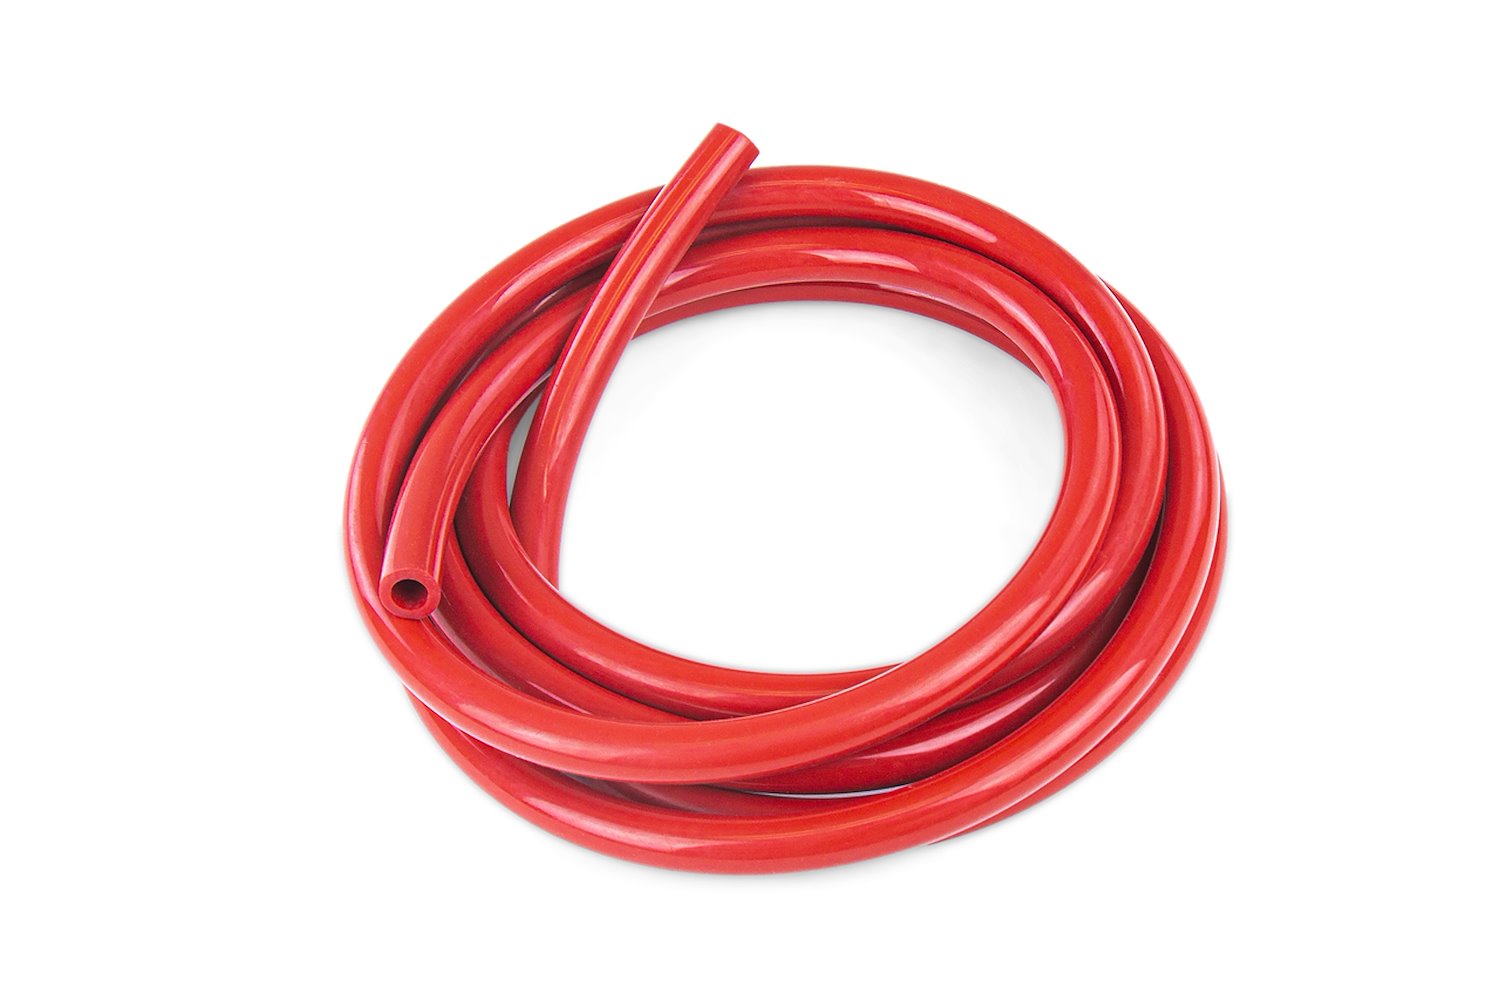 HTSVH6-REDx10 High-Temperature Silicone Vacuum Hose Tubing, 1/4 in. ID, 10 ft. Roll, Red